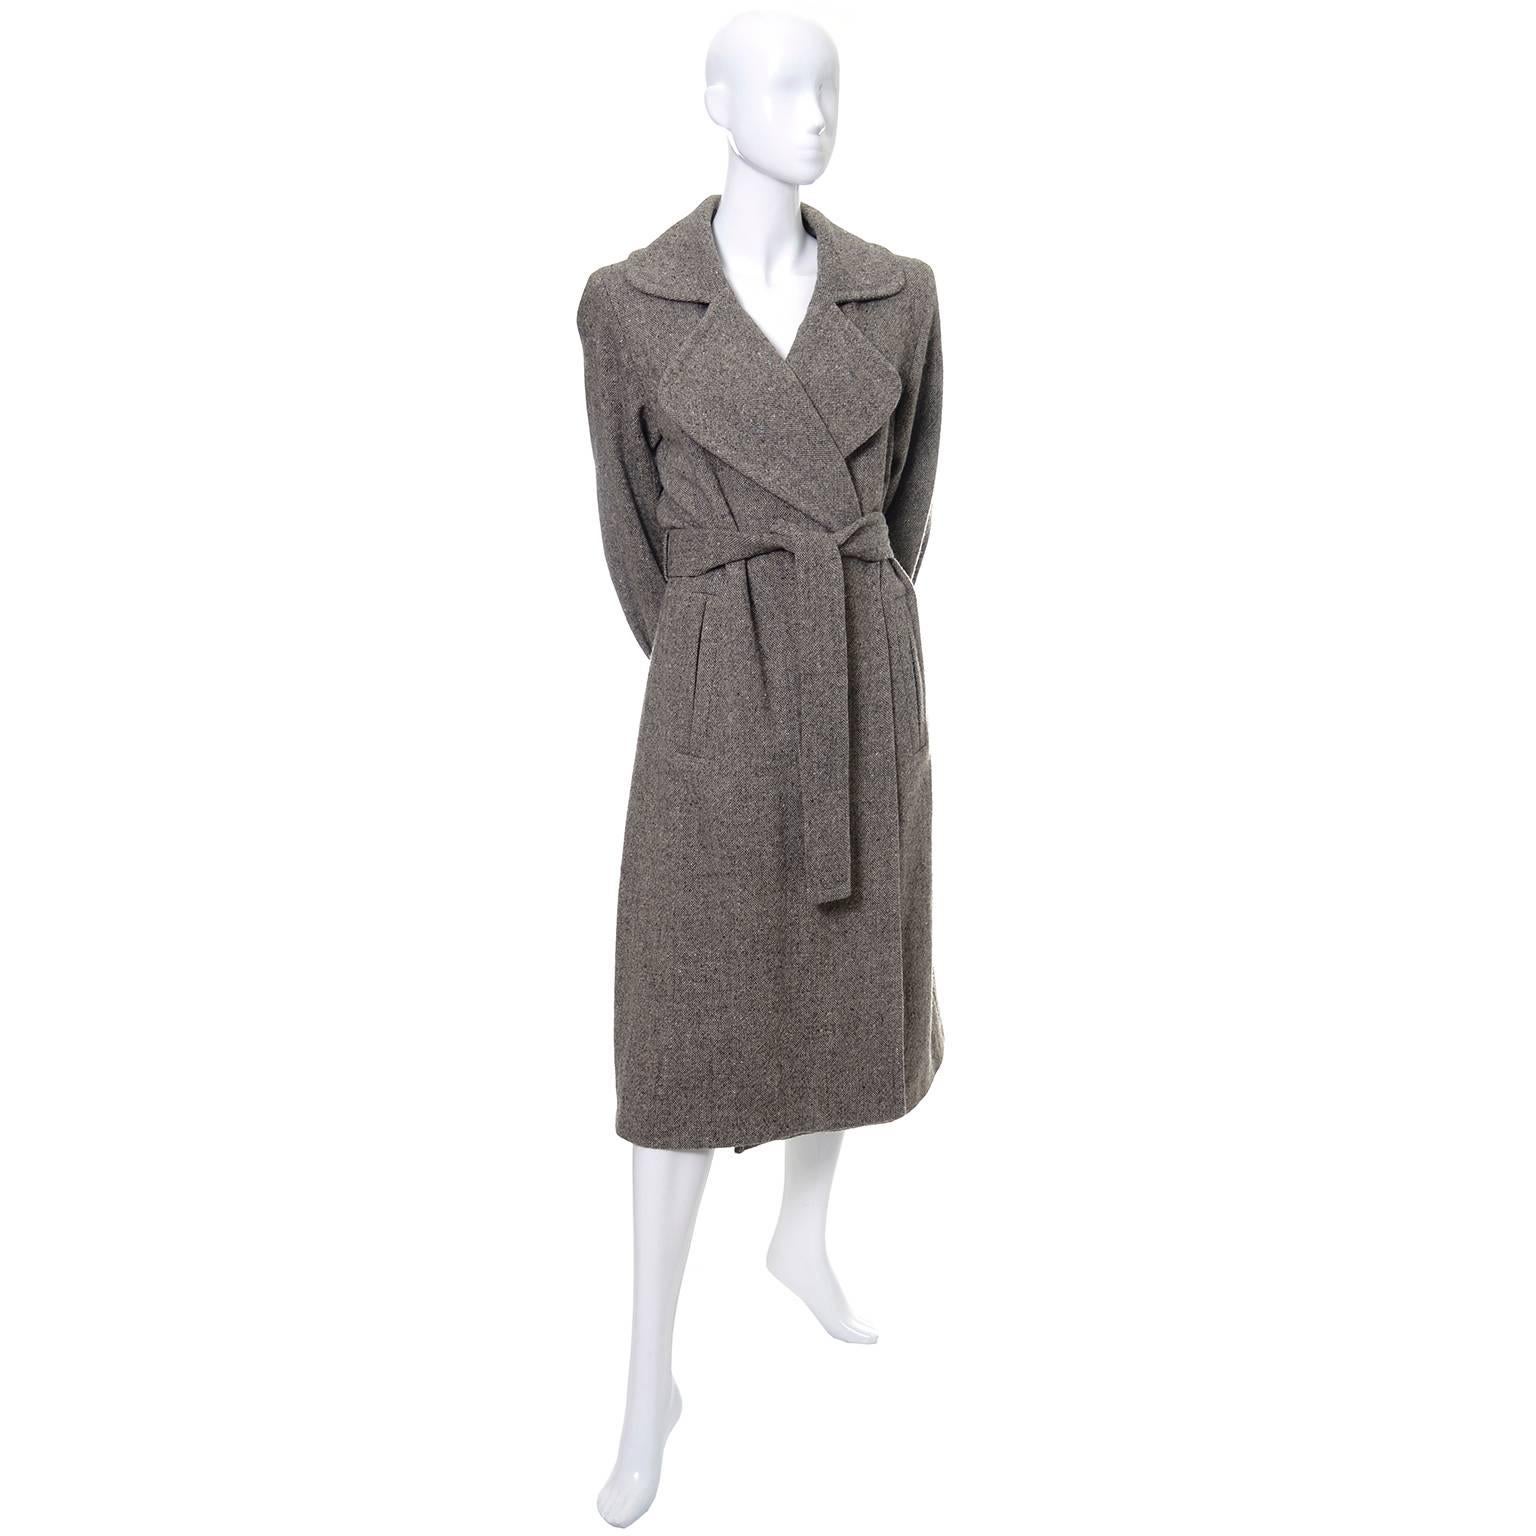 This beautiful vintage Yves Saint Laurent Rive Gauche tweed trench coat is in as new condition and comes from the collection of a woman who bought many incredible YSL pieces. This fabulous coat is fully lined, has cuffed sleeves, the original belt,